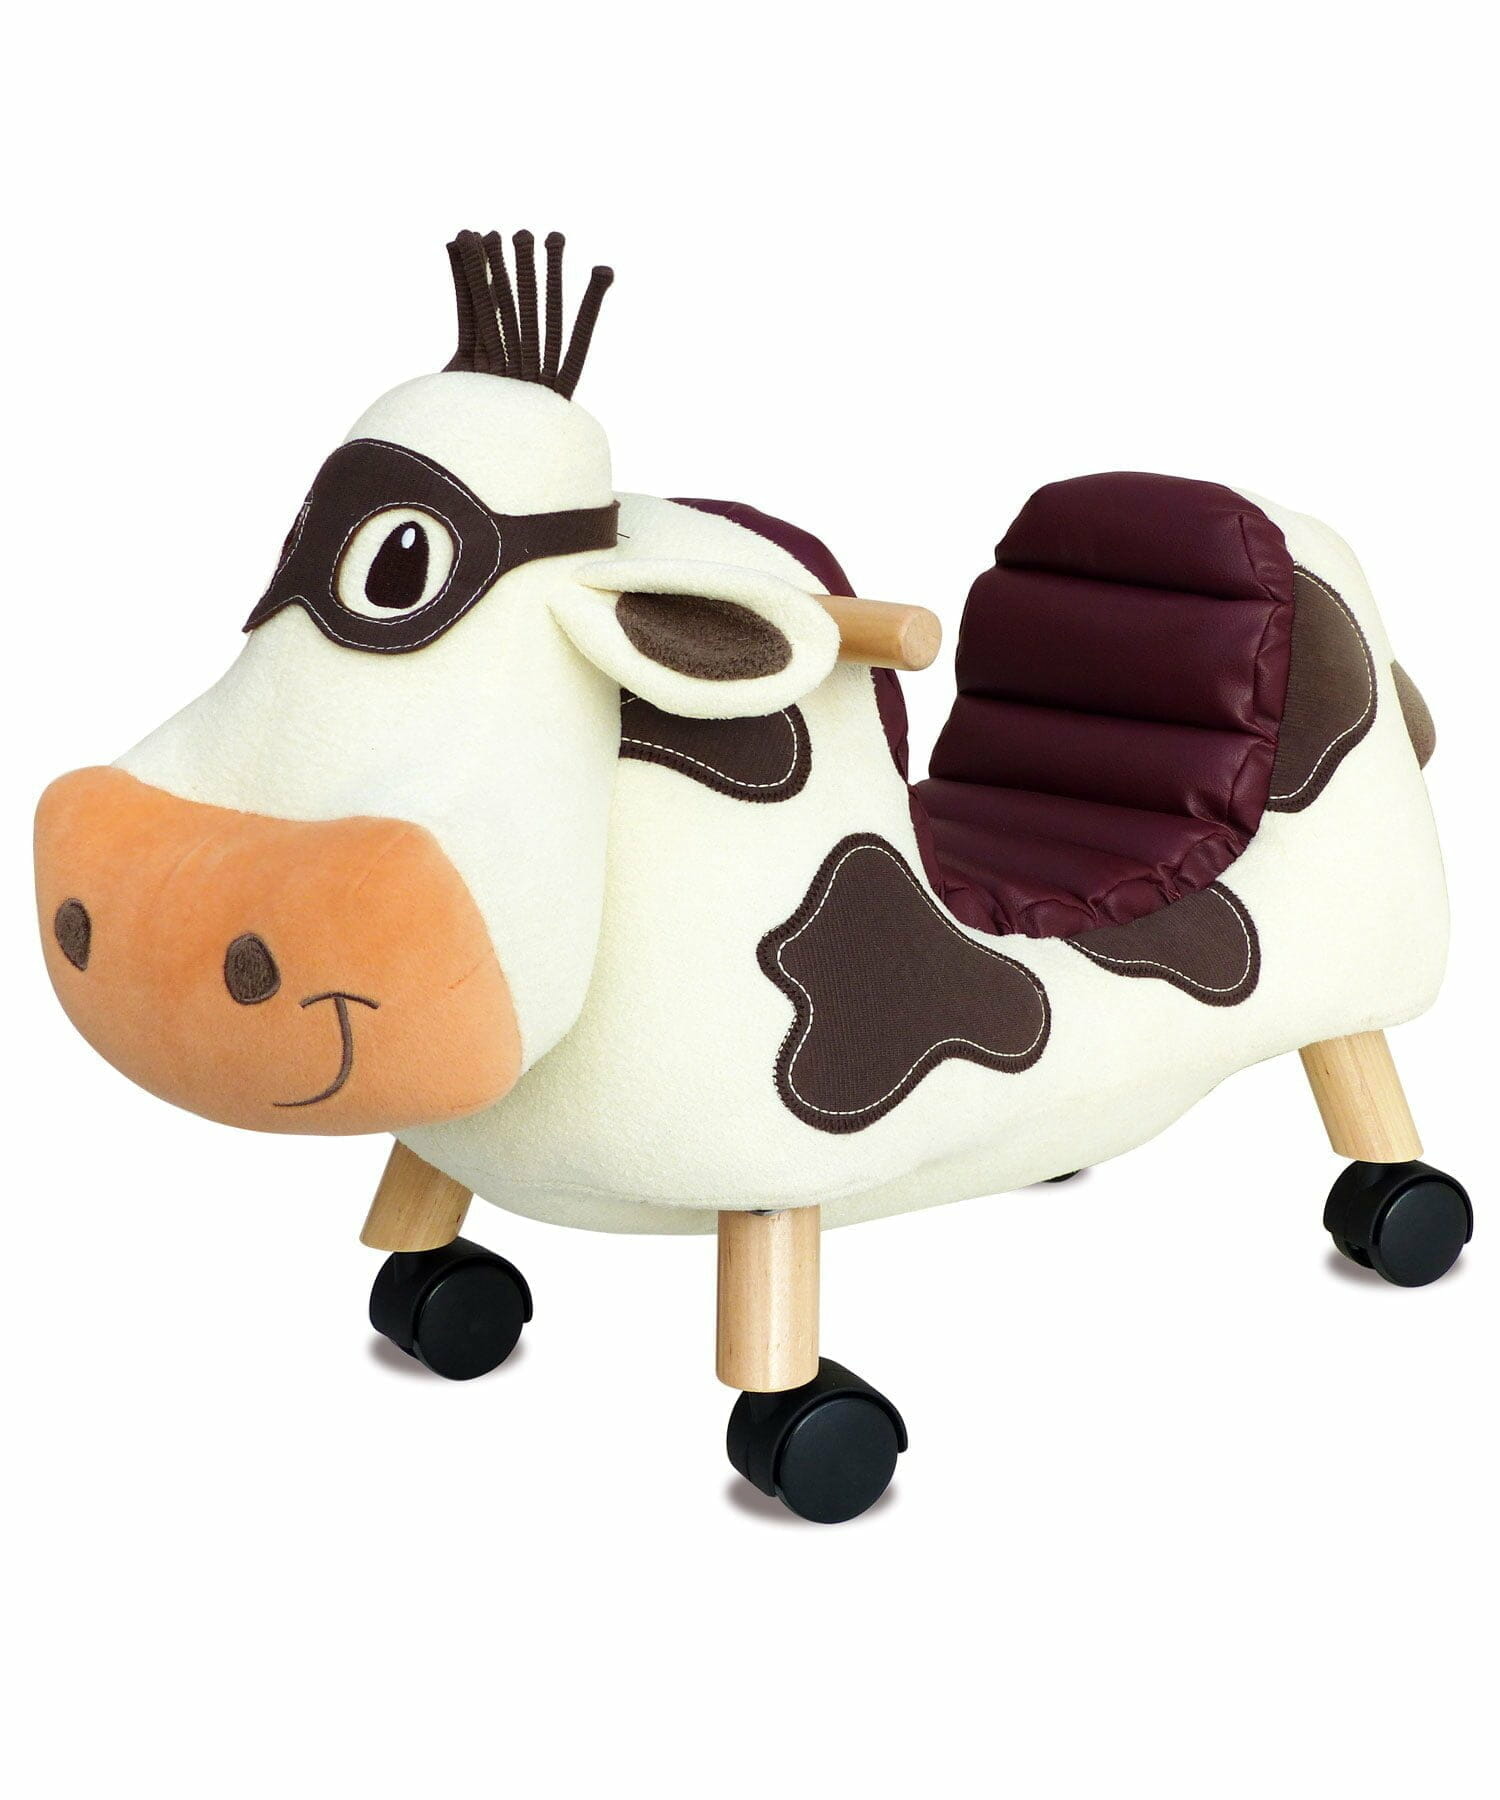 Moobert Cow Rideon Toy with supportive seat for toddlers